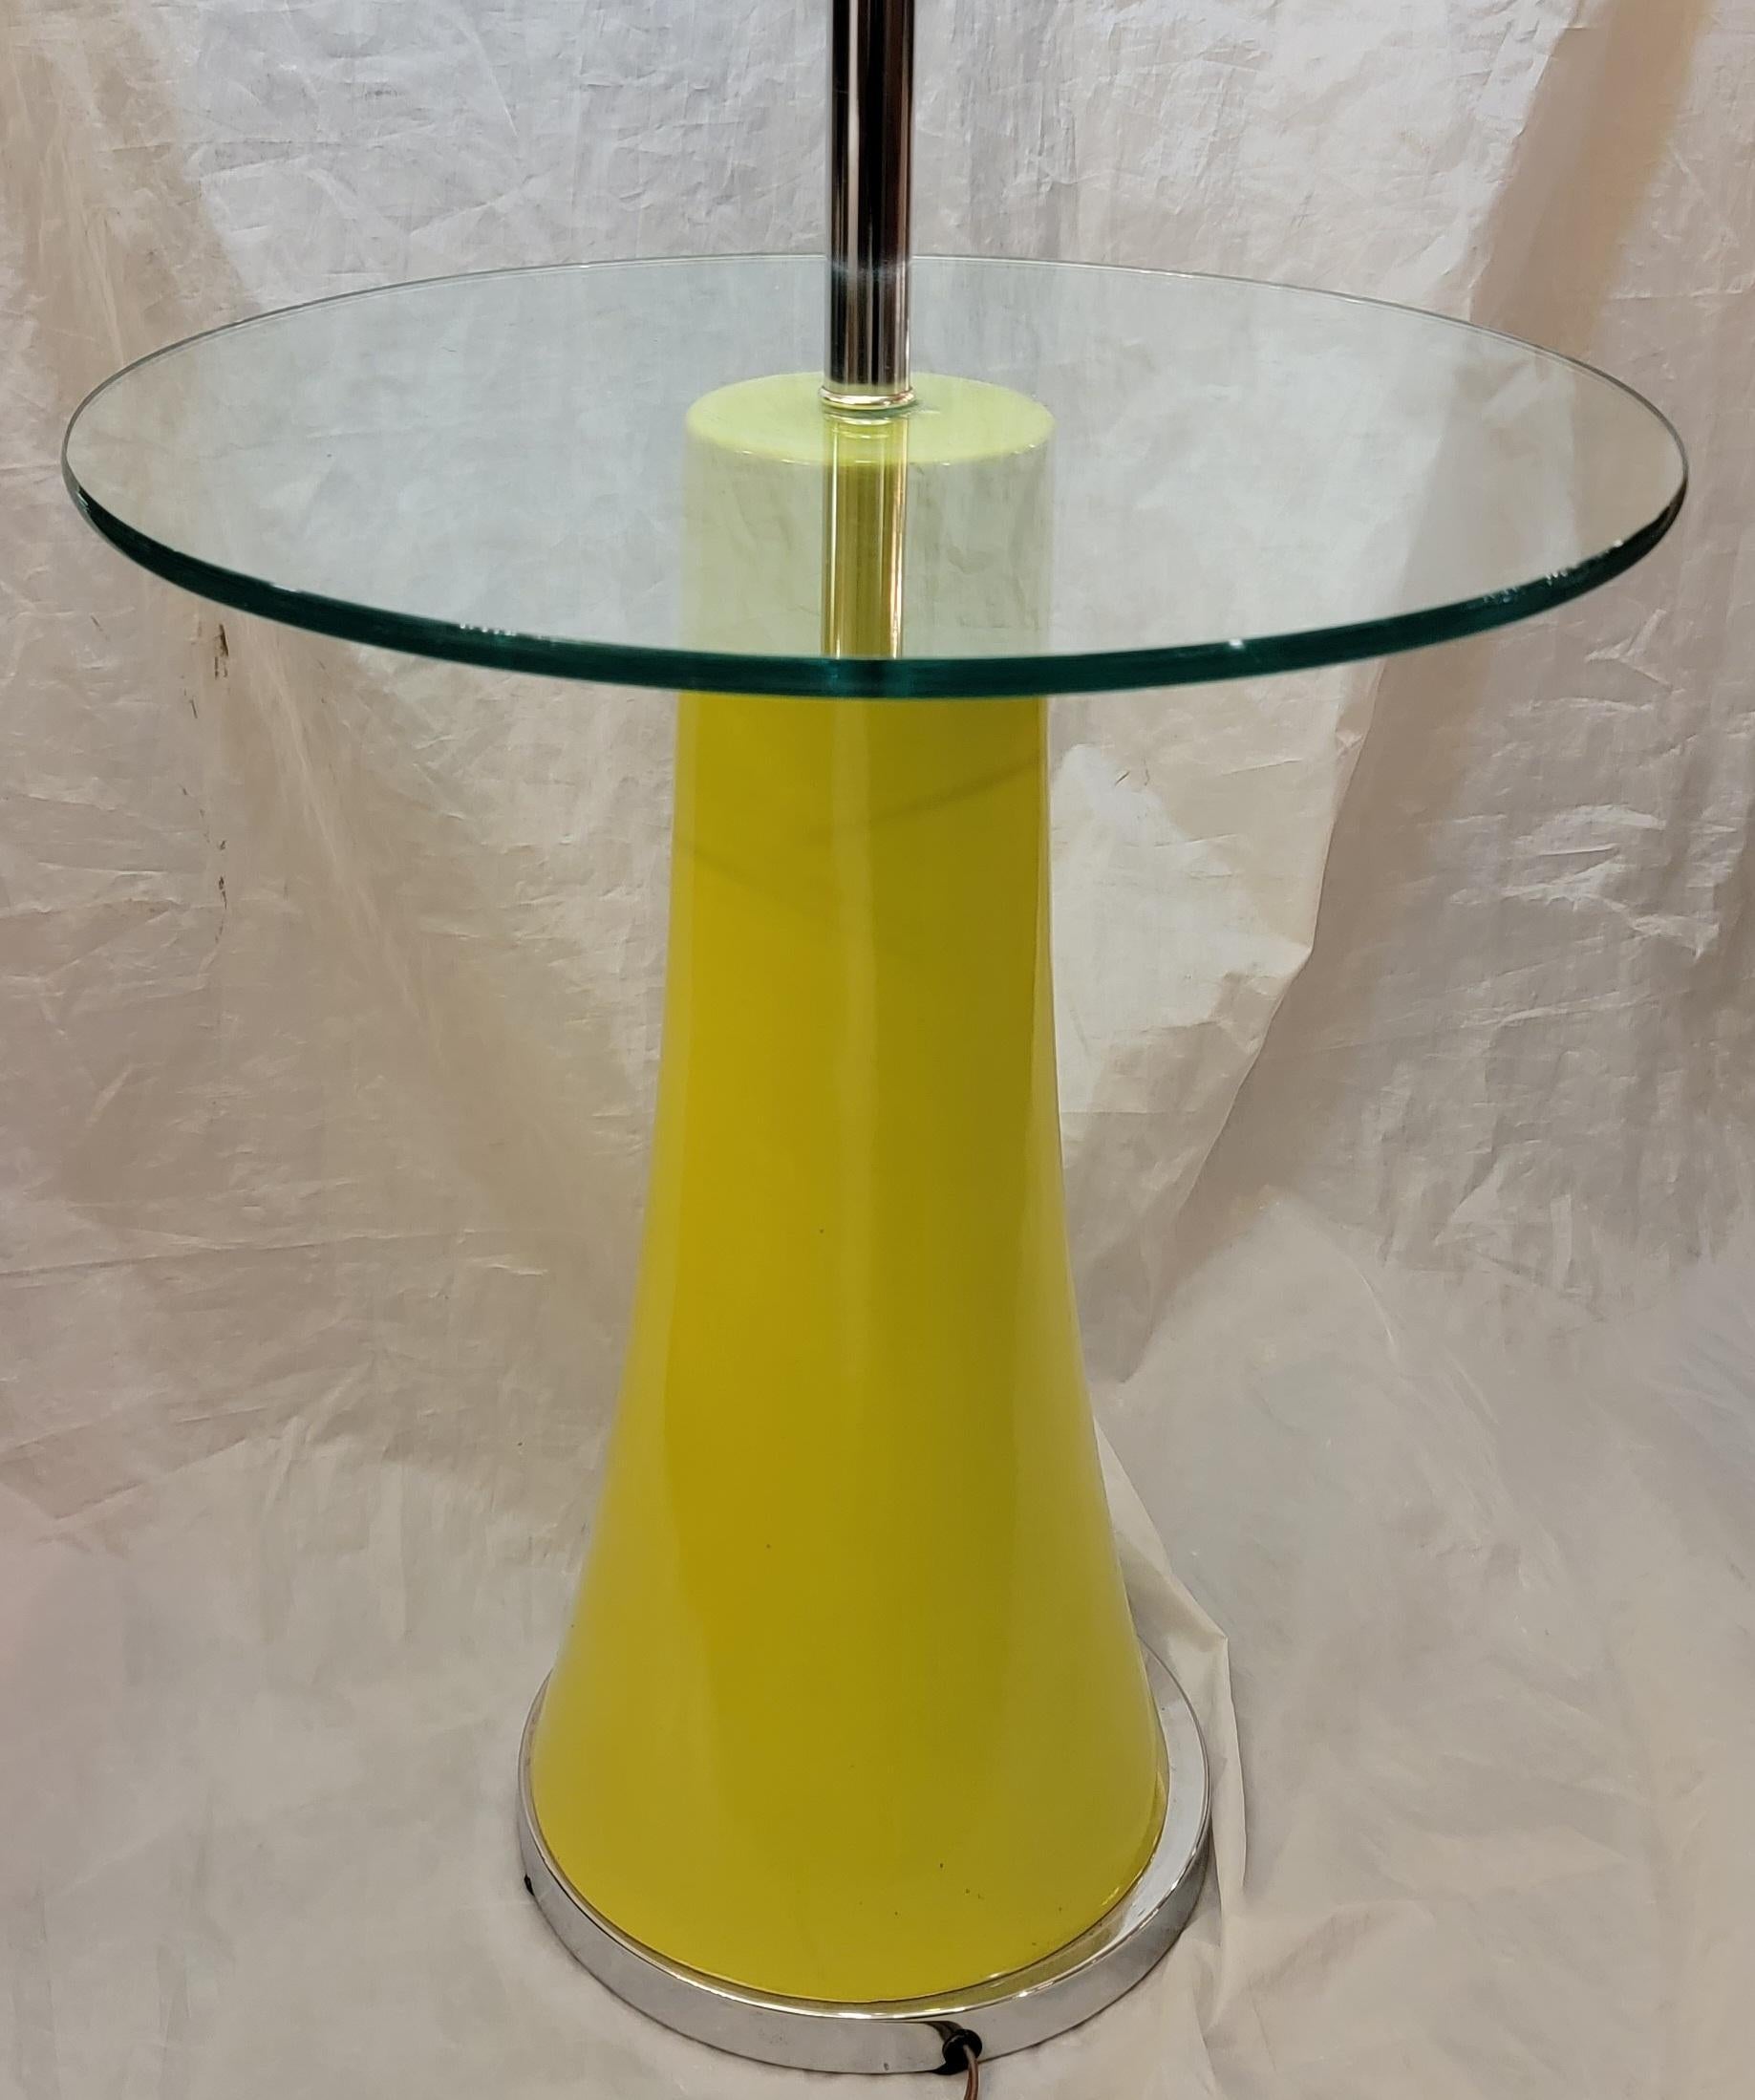 Midcentury chrome and lacquered floor lamp with round glass center table. The base is made from a painted laquer metal and has a unique greenish Yellow color.